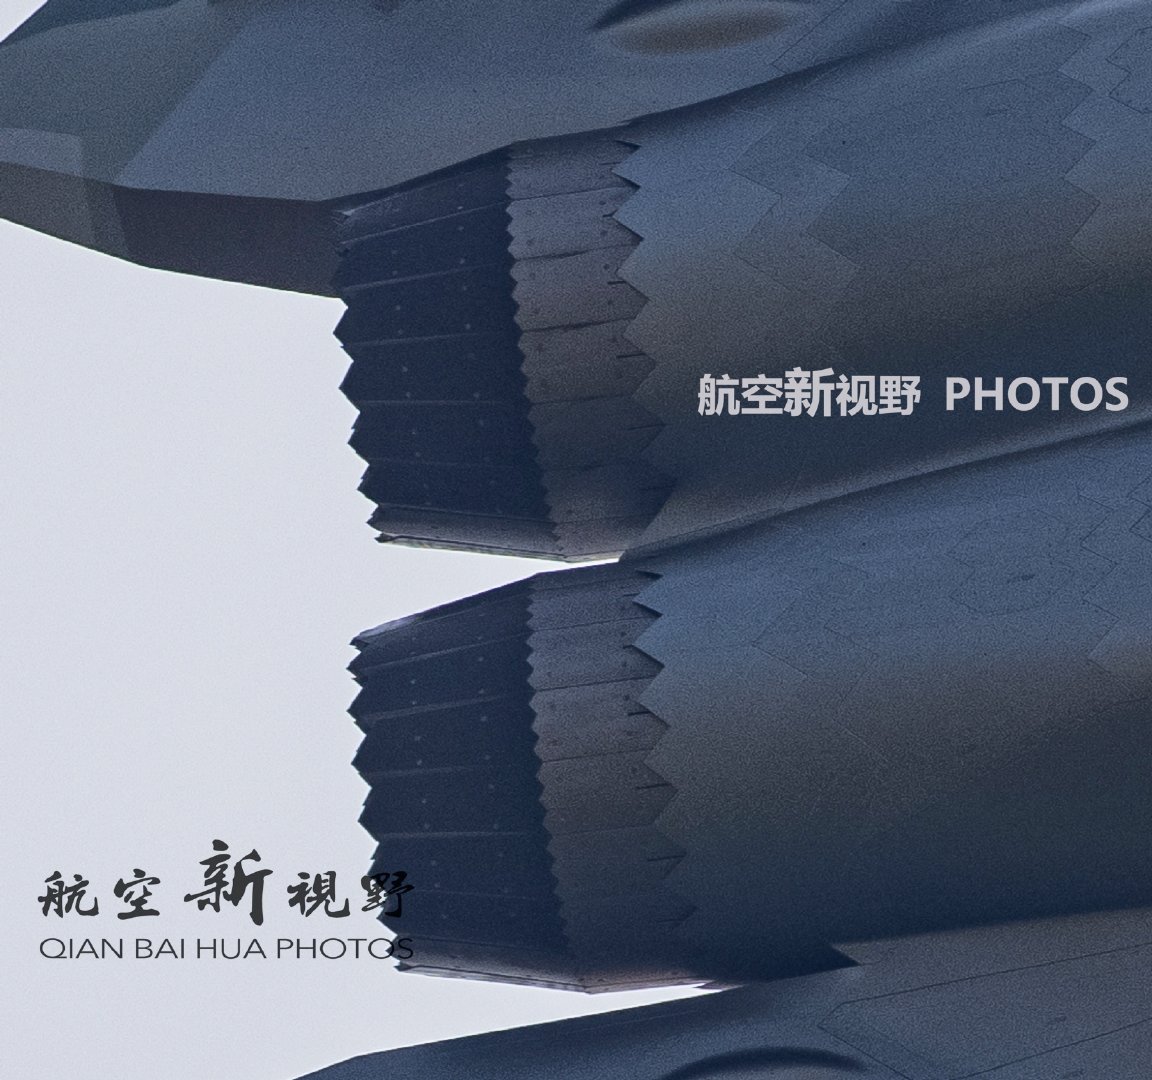 J-20 5th Generation Fighter VII | Page 325 | Sino Defence Forum 